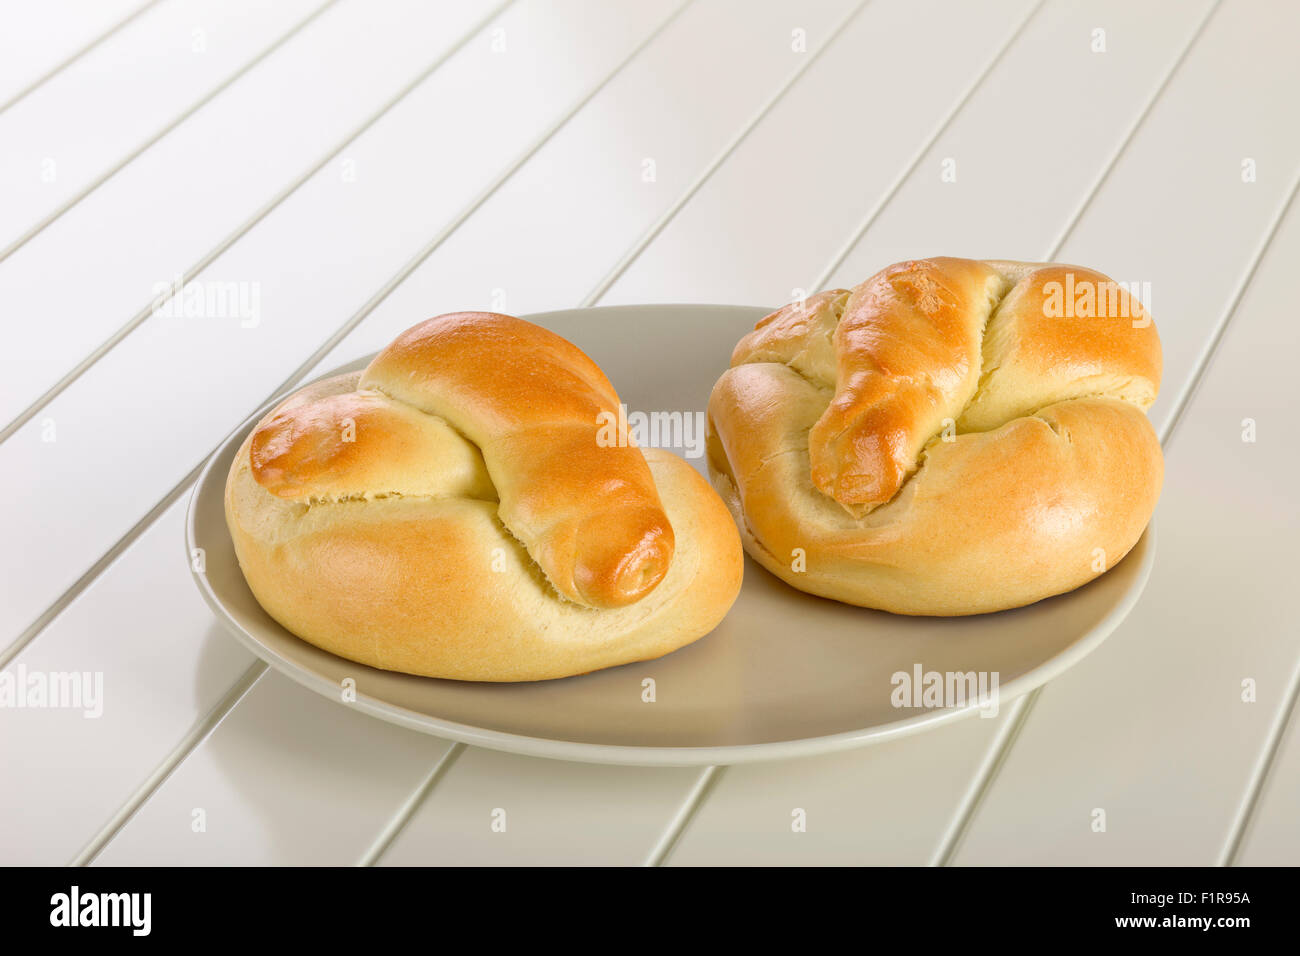 Bread roll on ceramic plate, white wooden background. Stock Photo